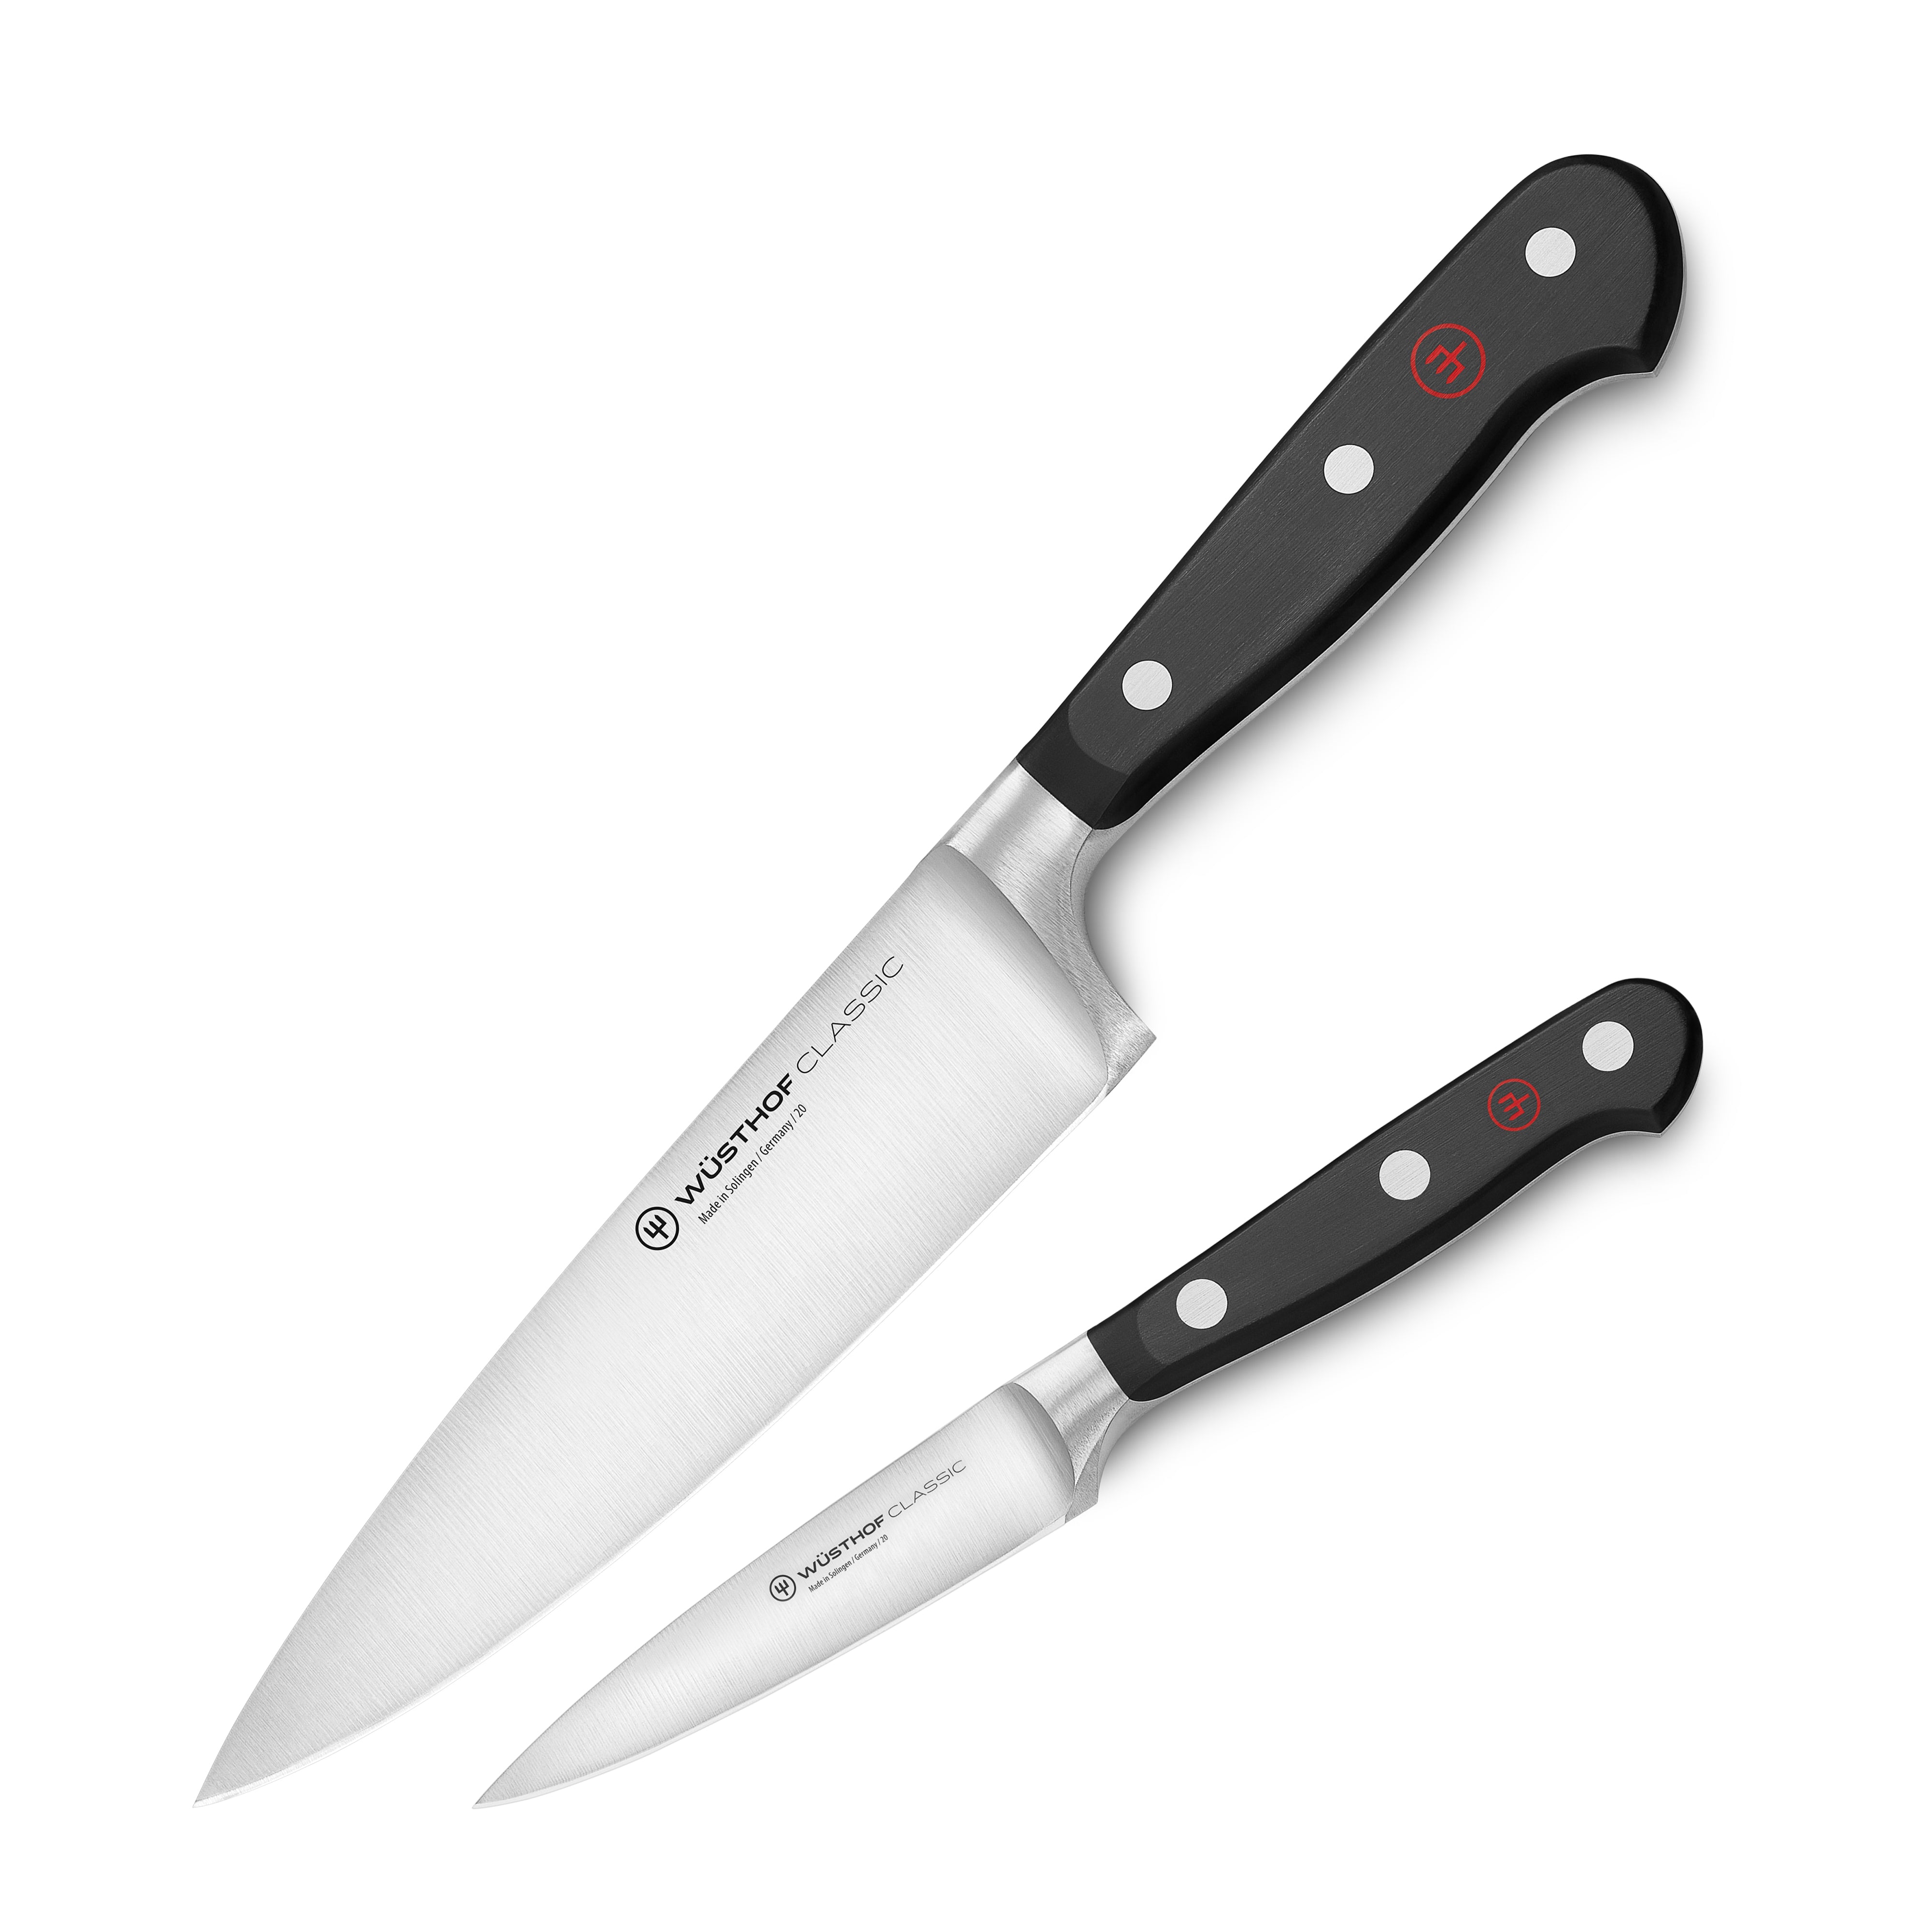 Wusthof Classic 6 Cook's Knife - Black(high Carbon Stainless Steel)